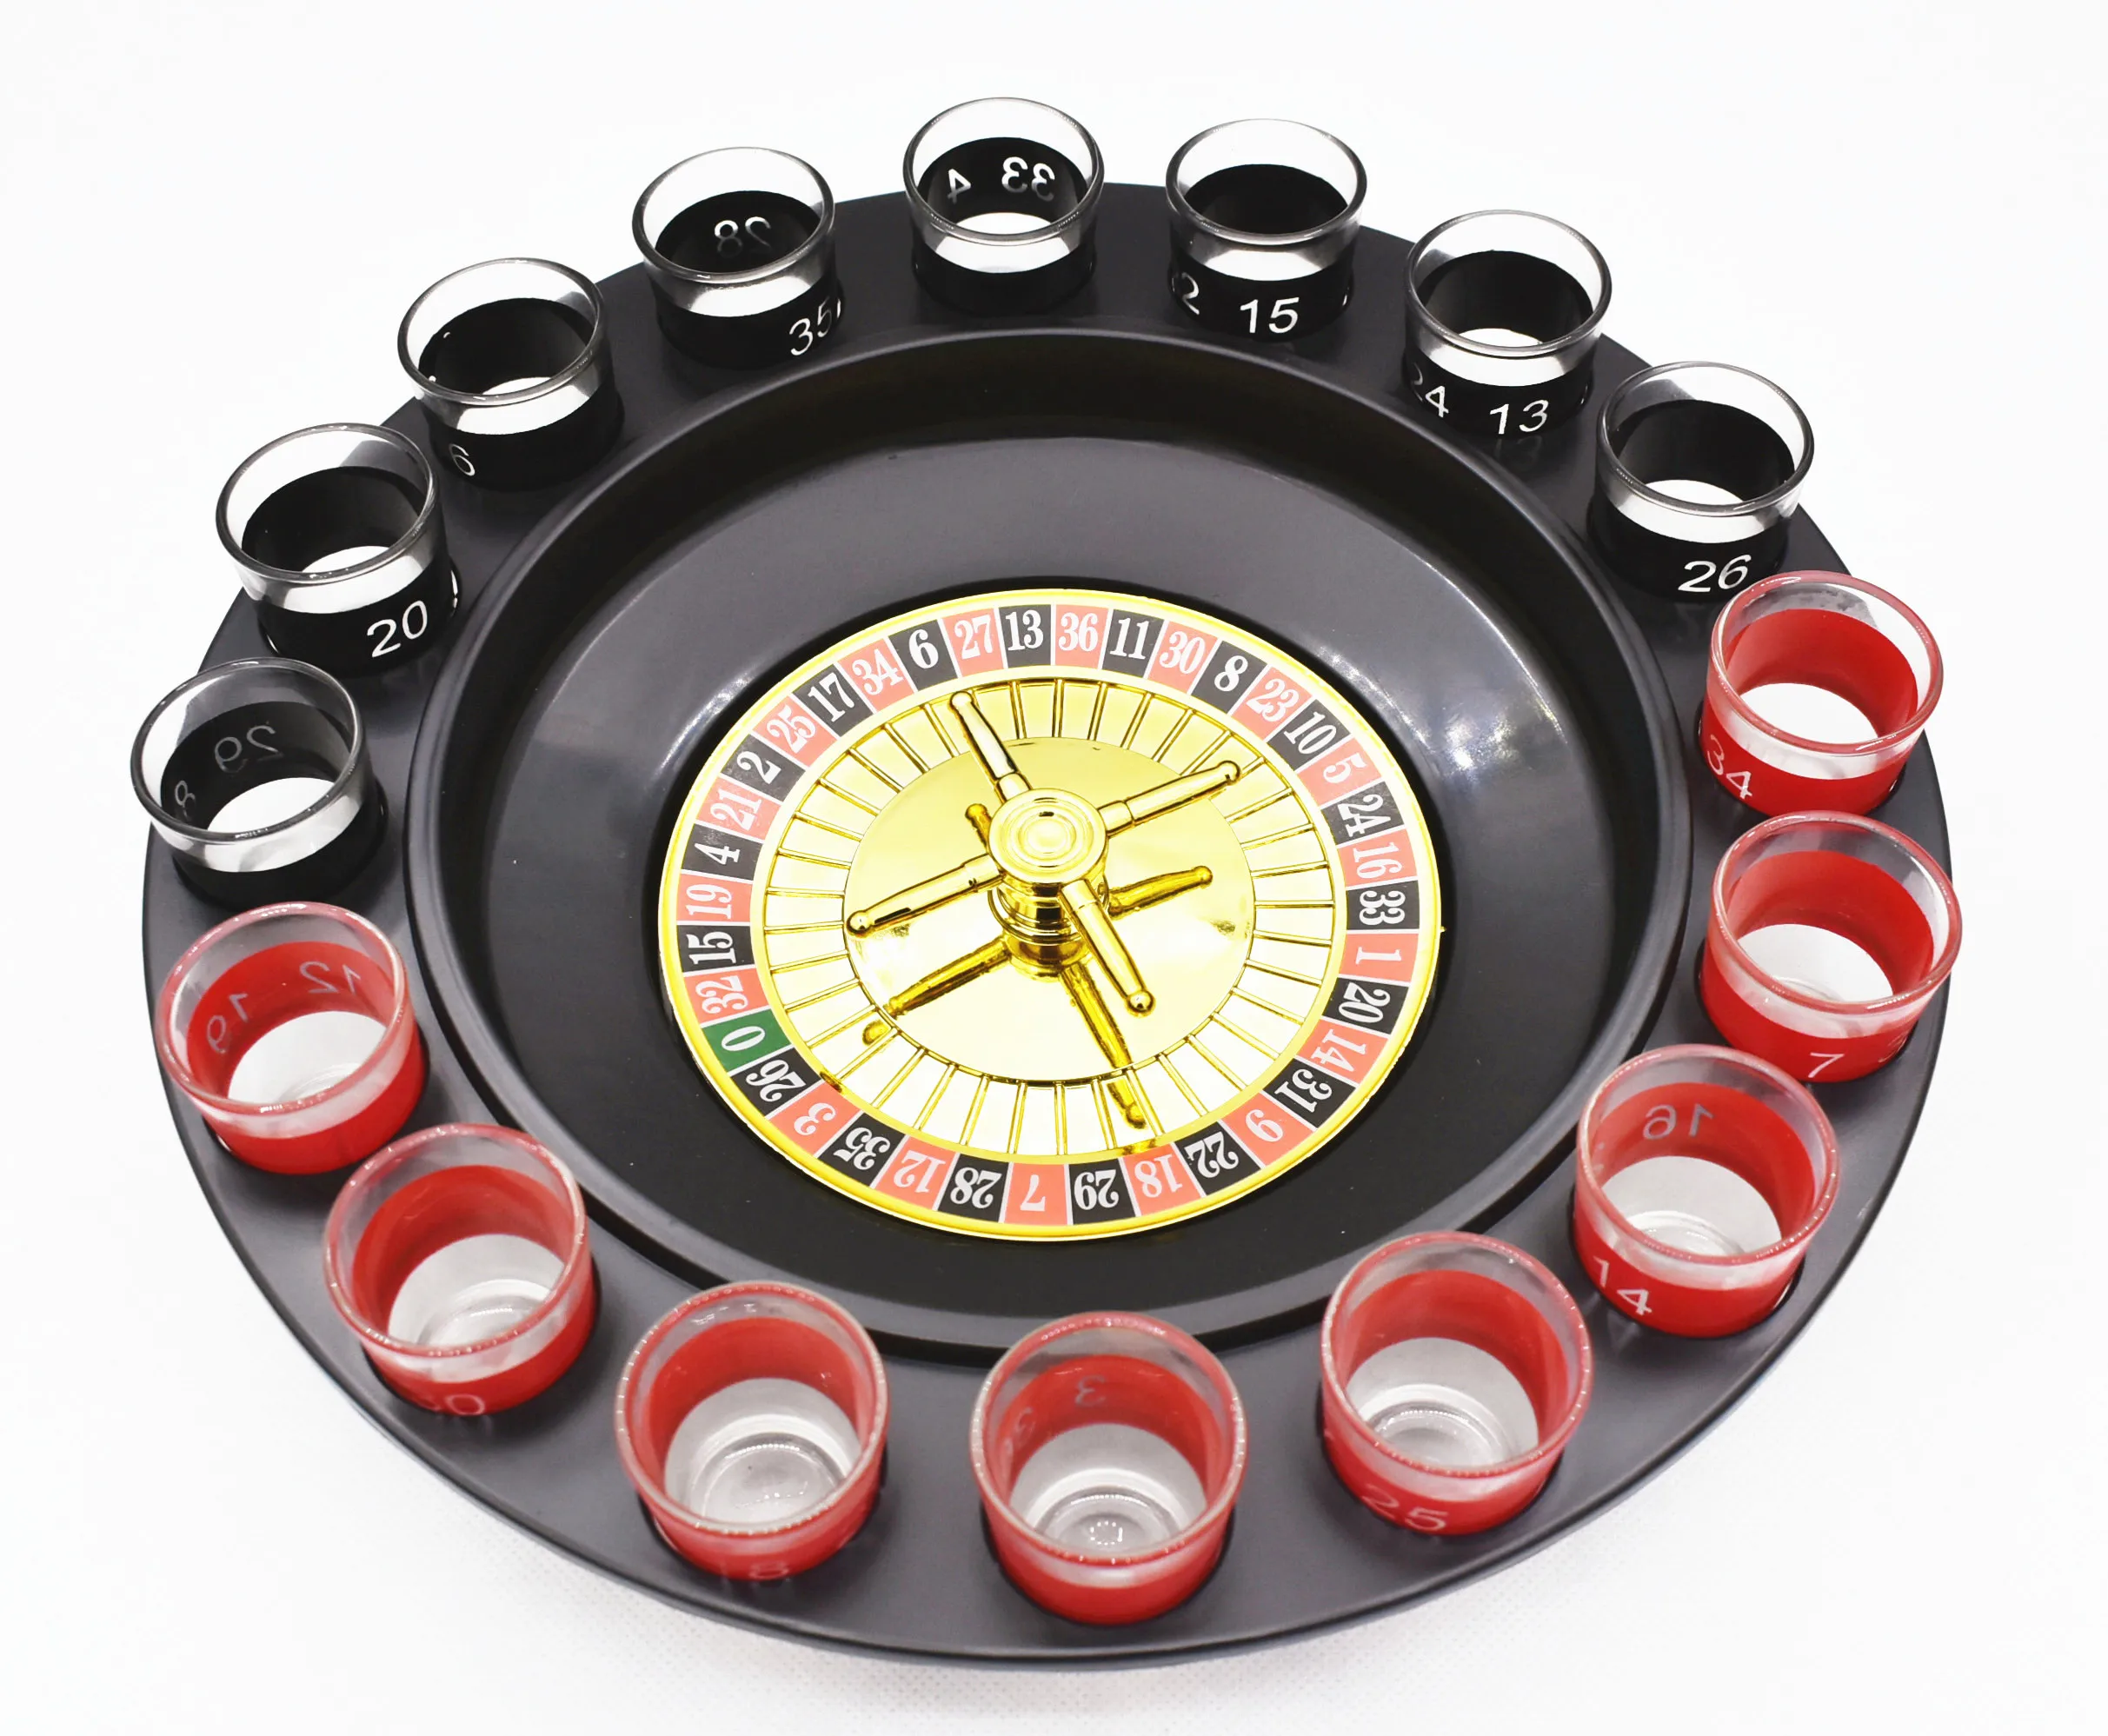 

16 shot glass casino machine roulette for drinking roulette wheel party drinking game